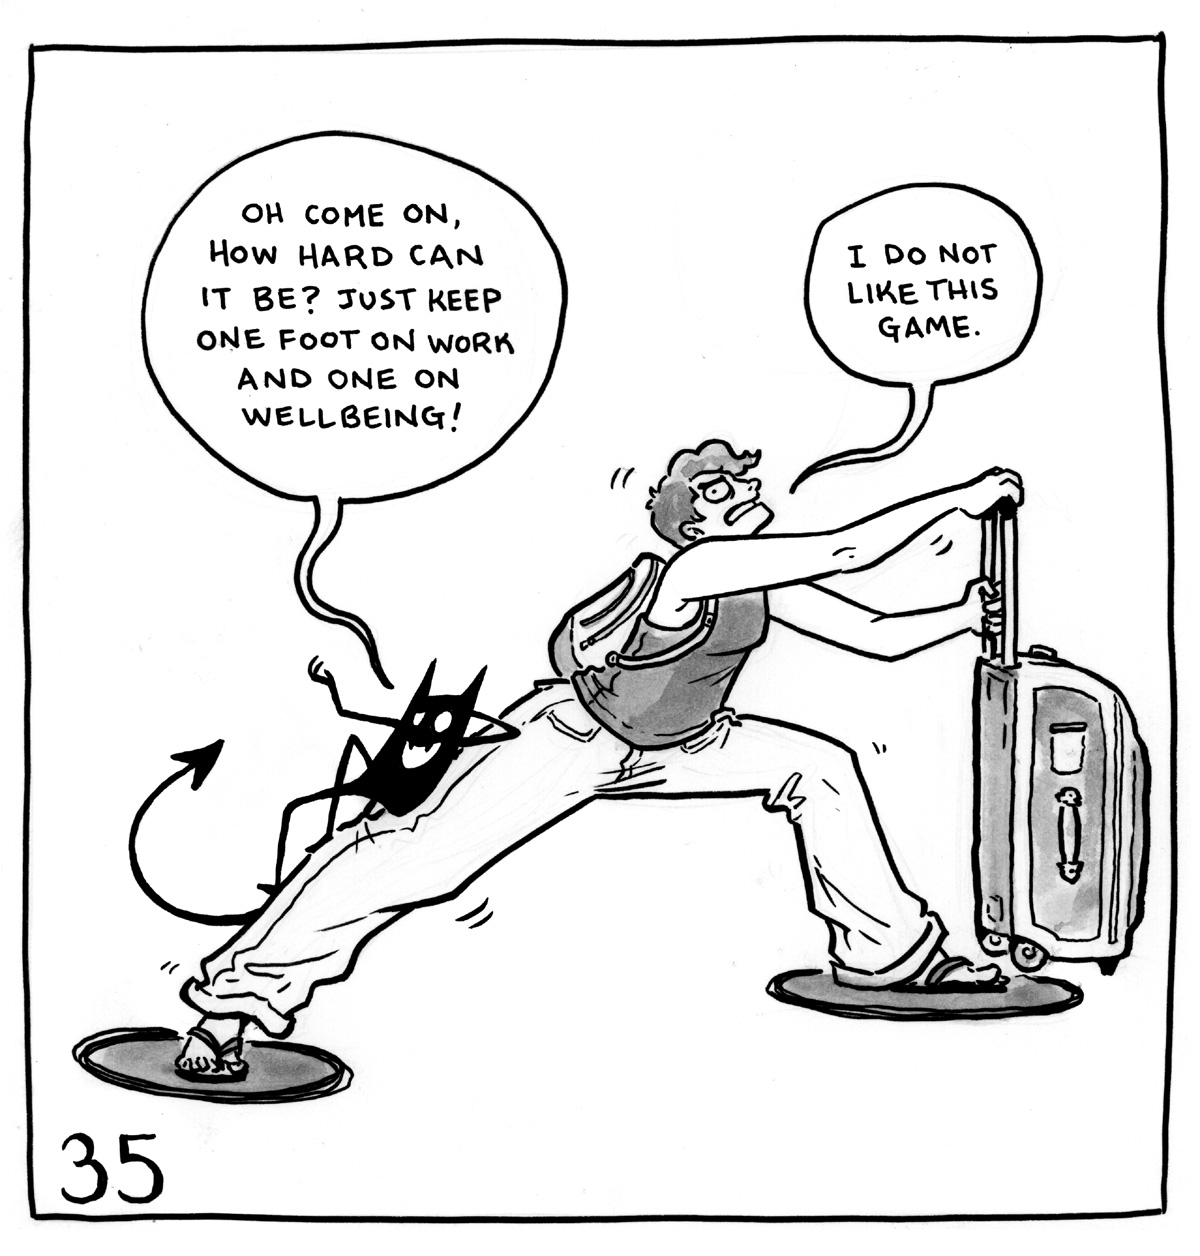 Comic drawing: Lucy is standing with her feet on different grey circles like a game of Twister, almost doing the splits while clinging to a suitcase. The demon lounges on her leg and says, "Oh come on, how hard can it be? Just keep one foot on work and one on wellbeing!" Lucy says, "I do not like this game."